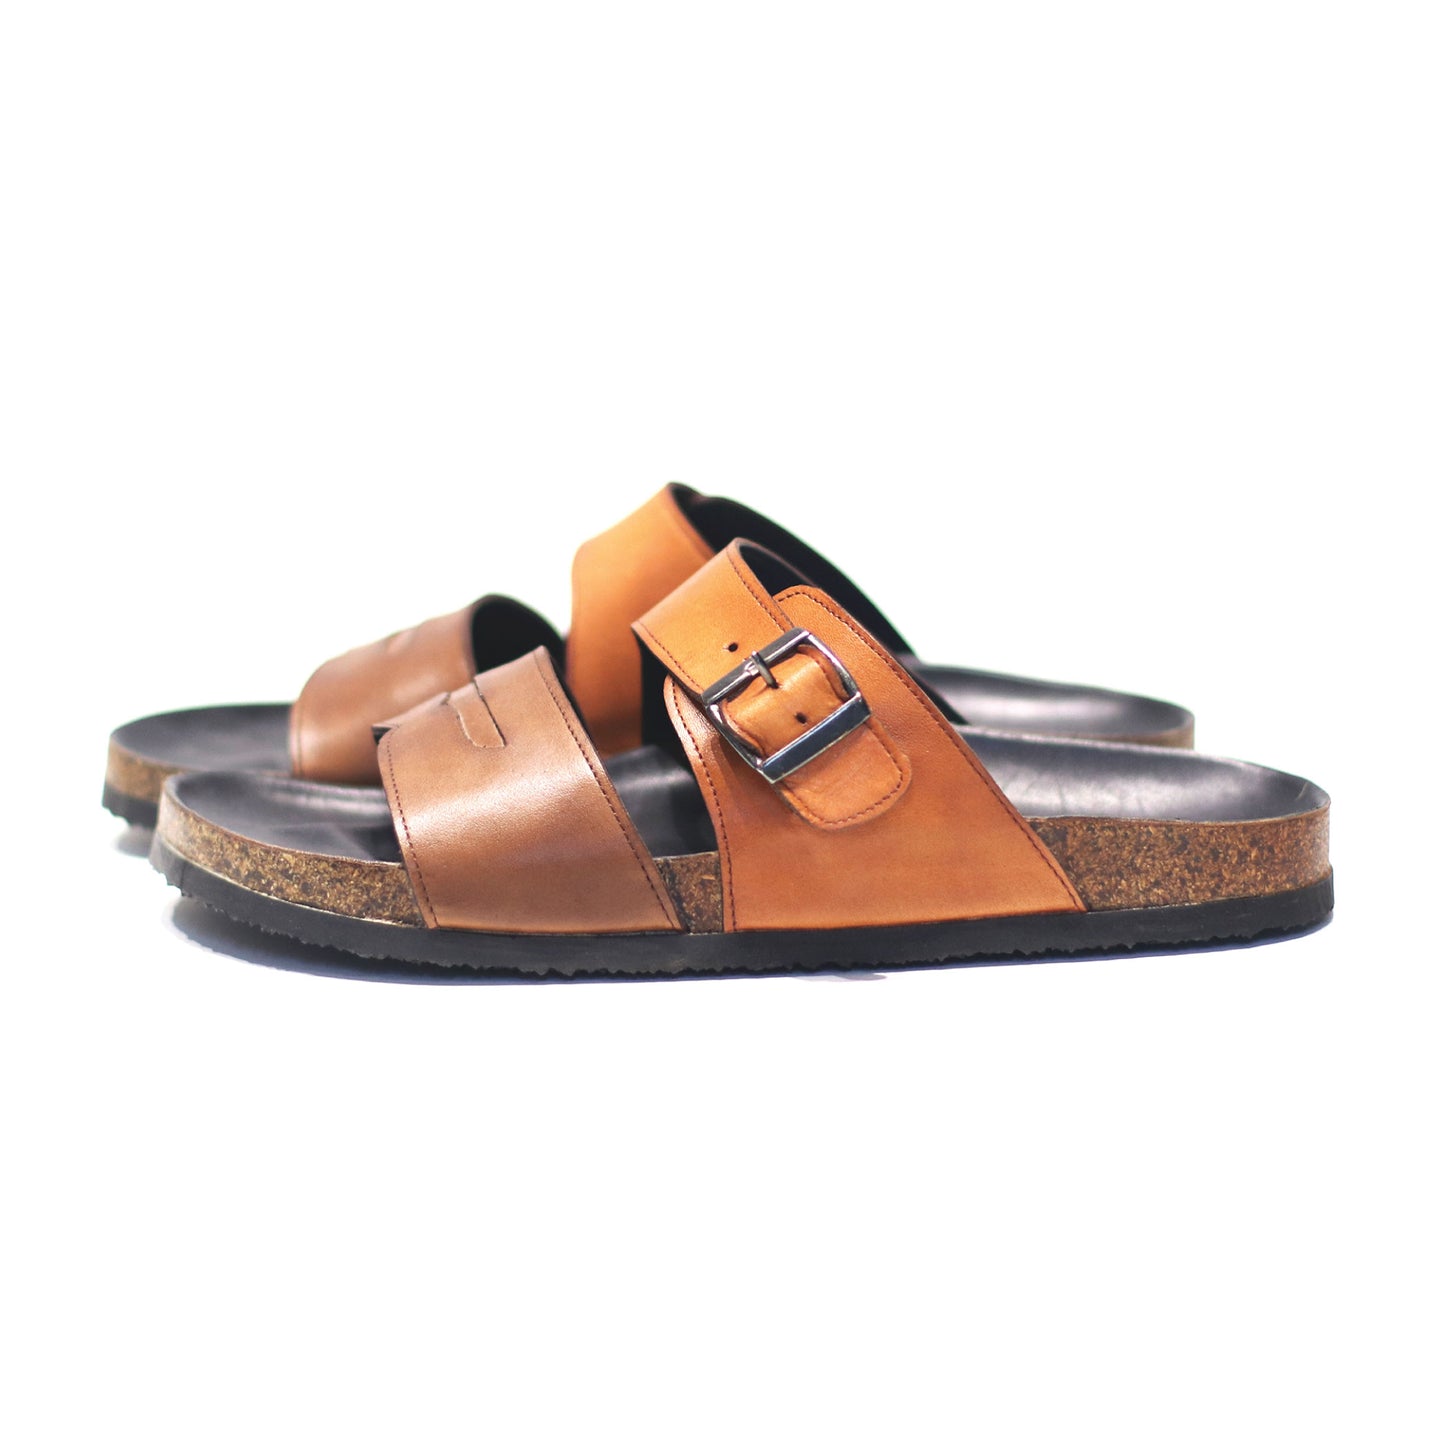 MM Sandals - Two Tone 1